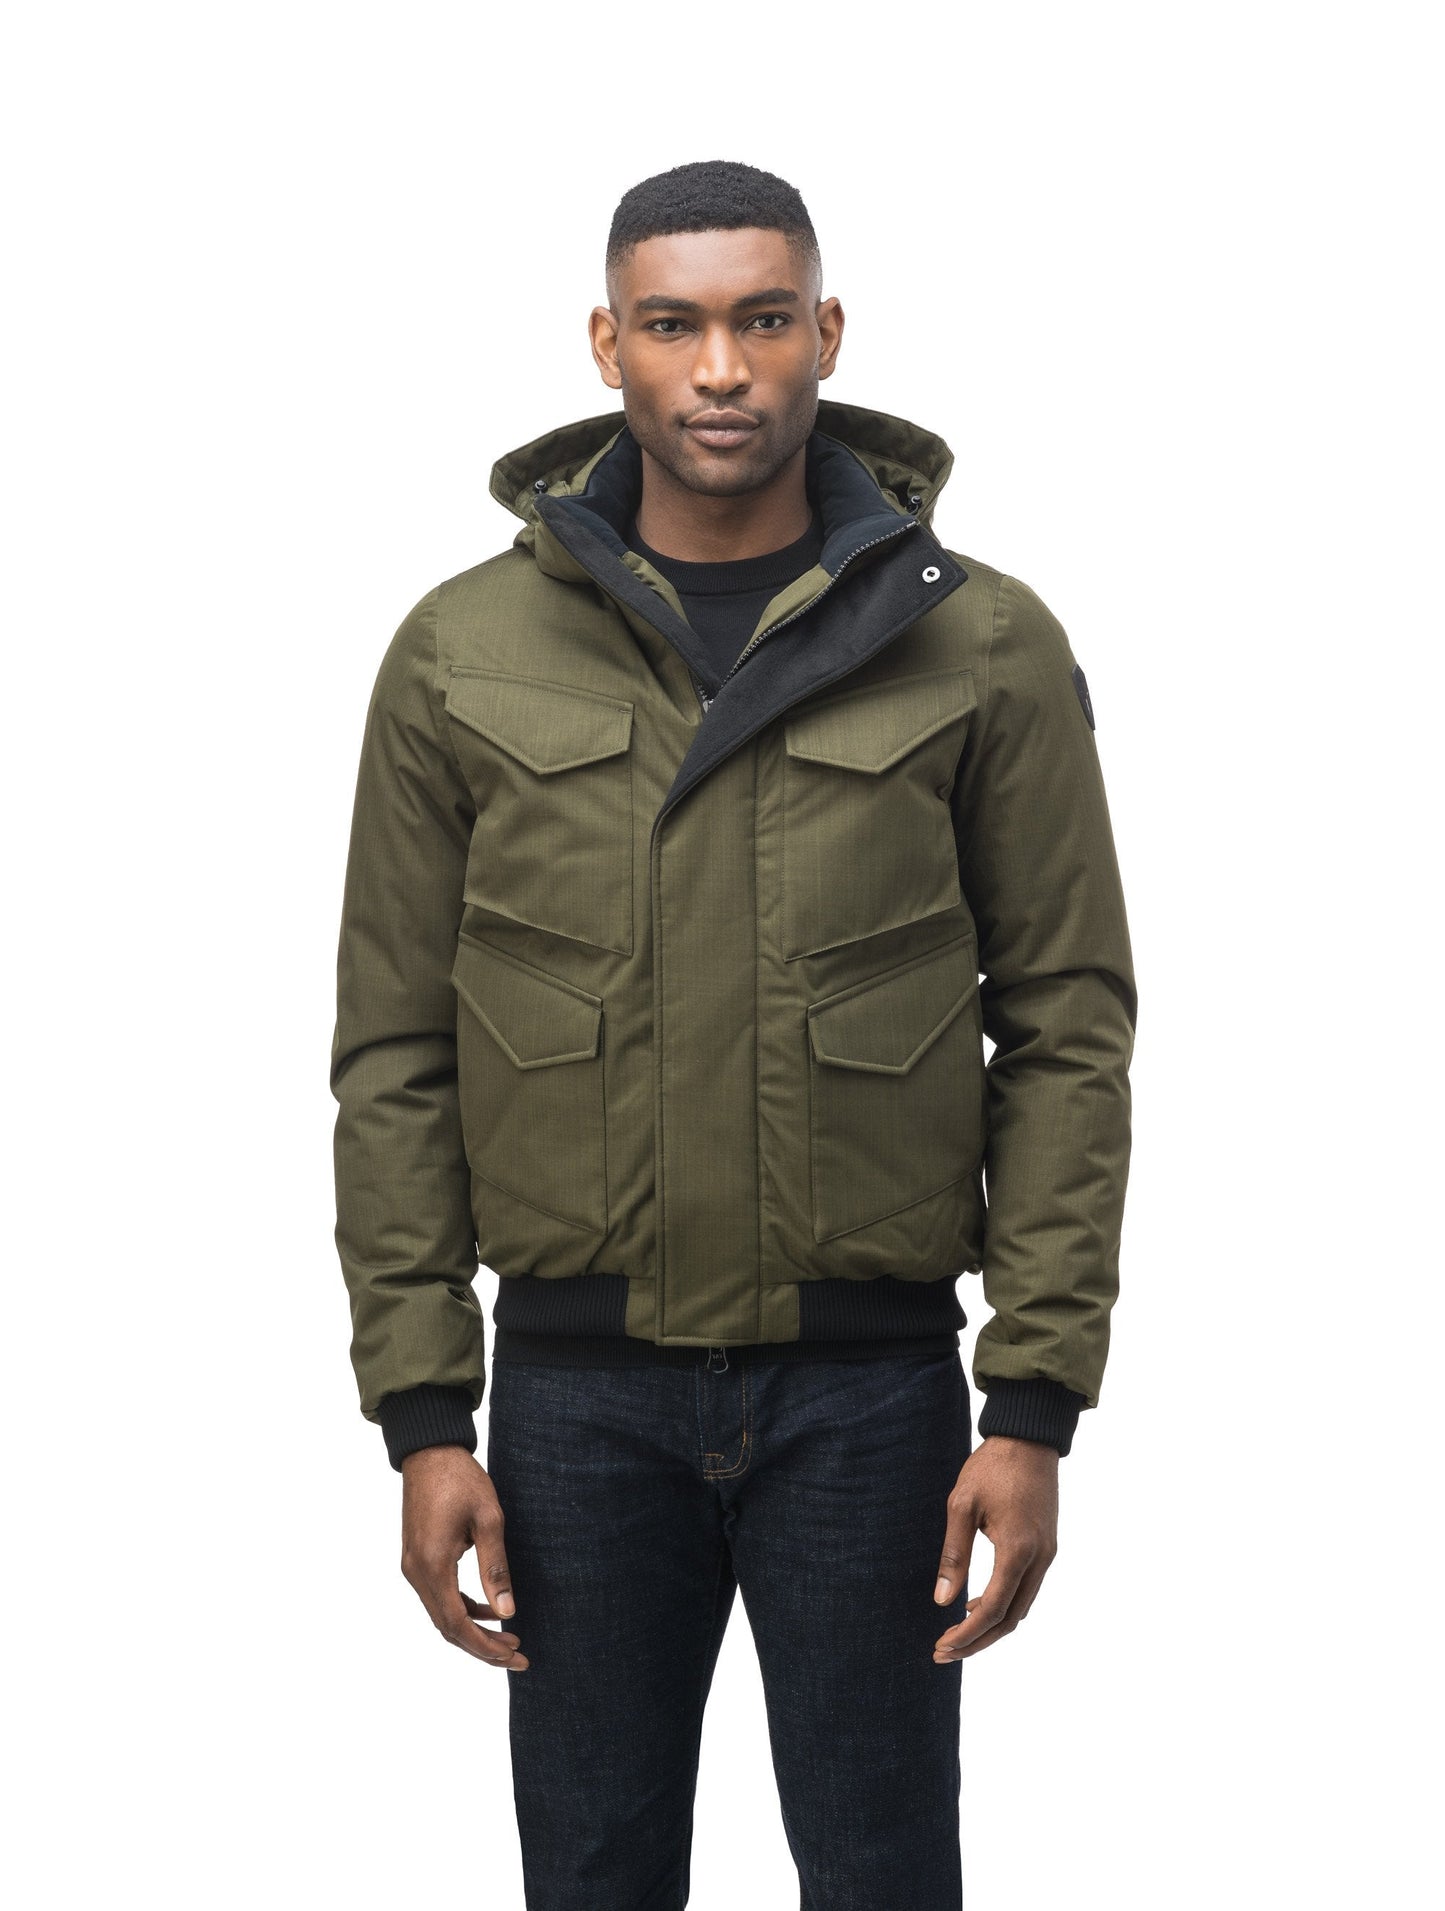 Men's waist length bomber with four huge pockets on the front in Fatigue